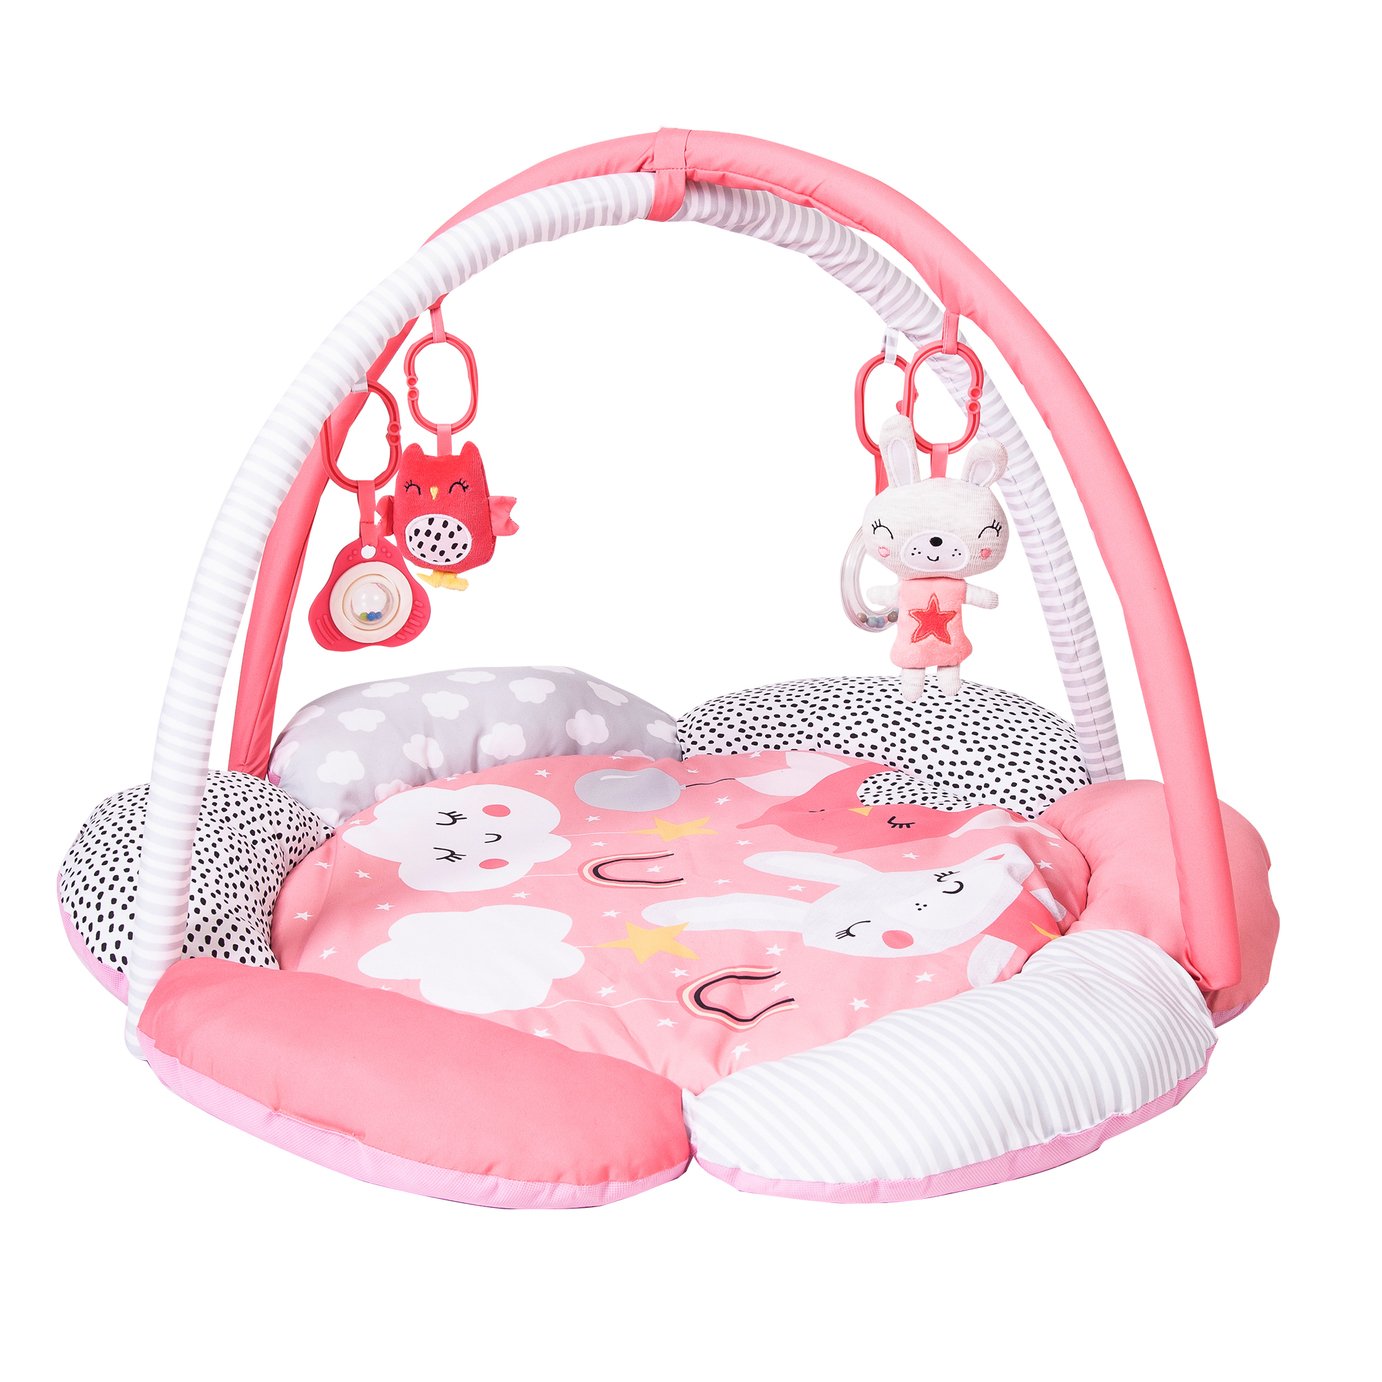 Red Kite Dreamy Meadow Playgym Review